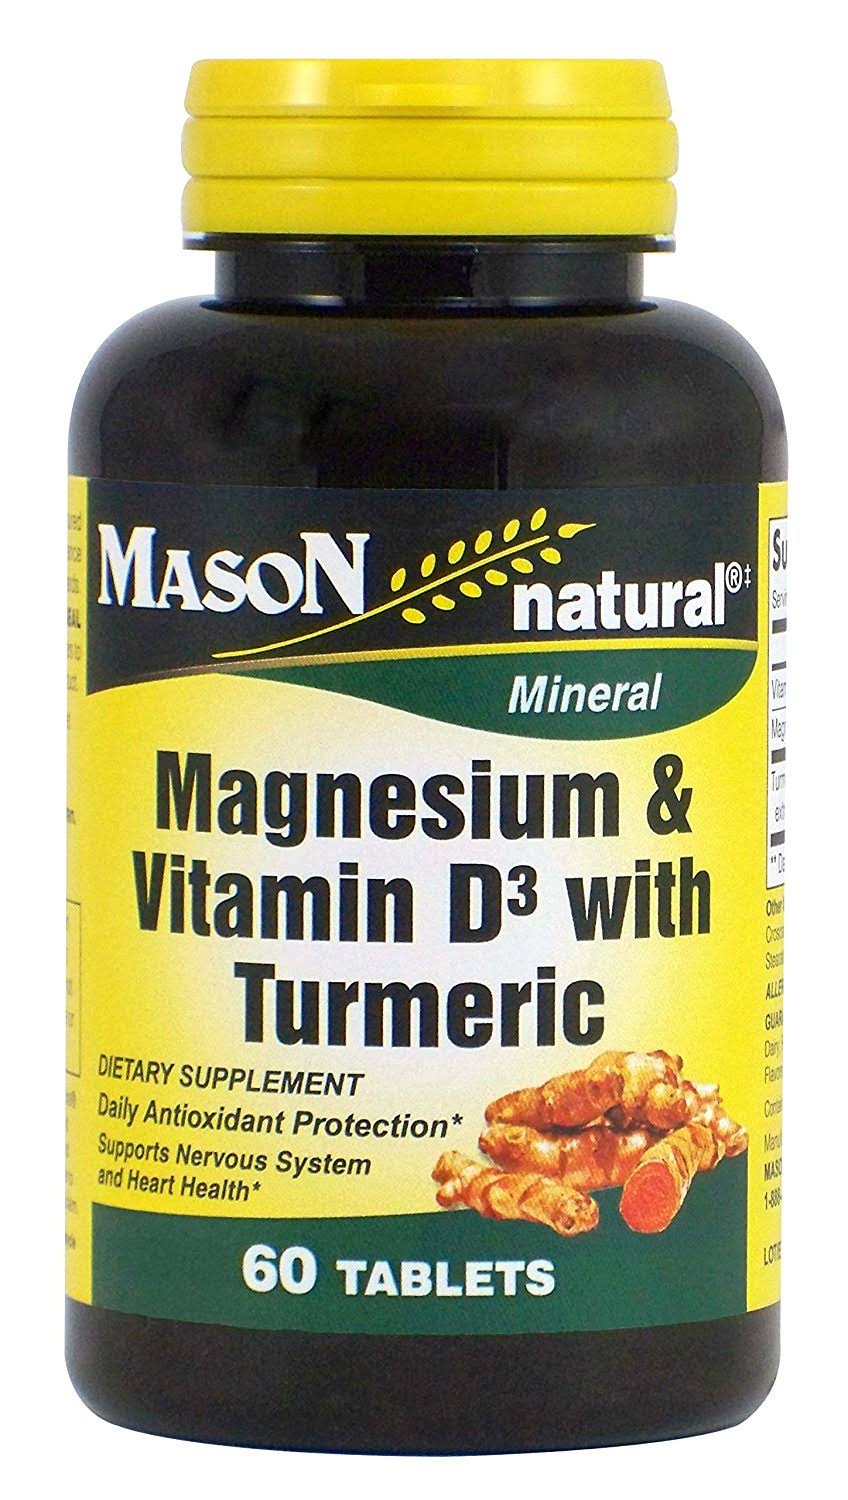 Mason Natural Magnesium and Vitamin D3 with Turmeric Dietary Supplement - 60 Tablets